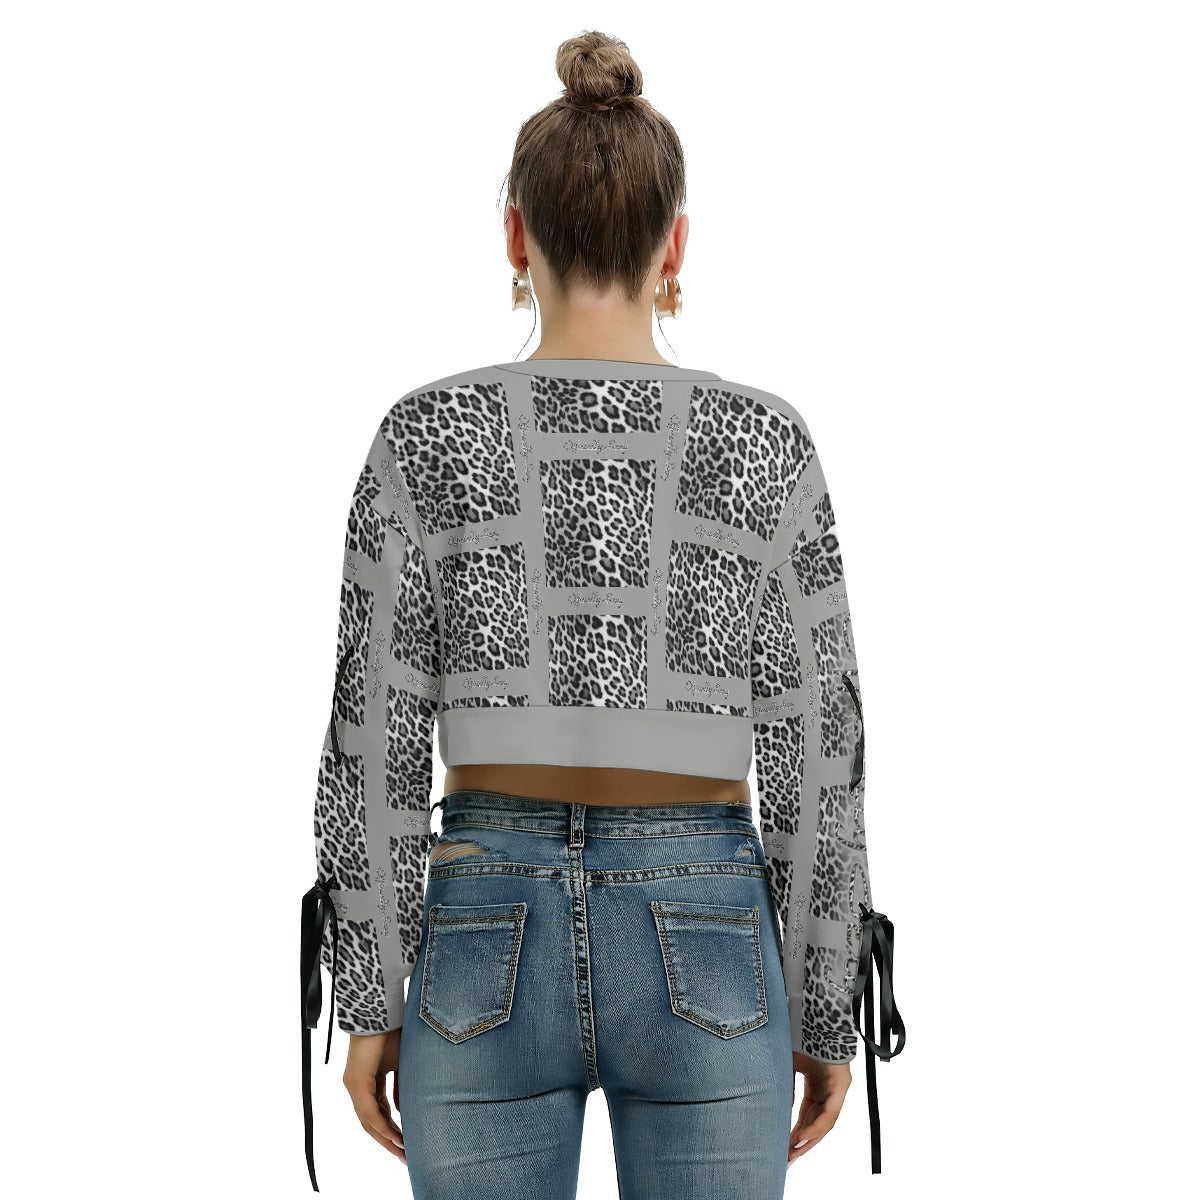 Officially Sexy Snow Leopard Print Collection Women's AOLP Grey Pattern Cropped Sweatshirt With Long Lace up Sleeves (English) 3